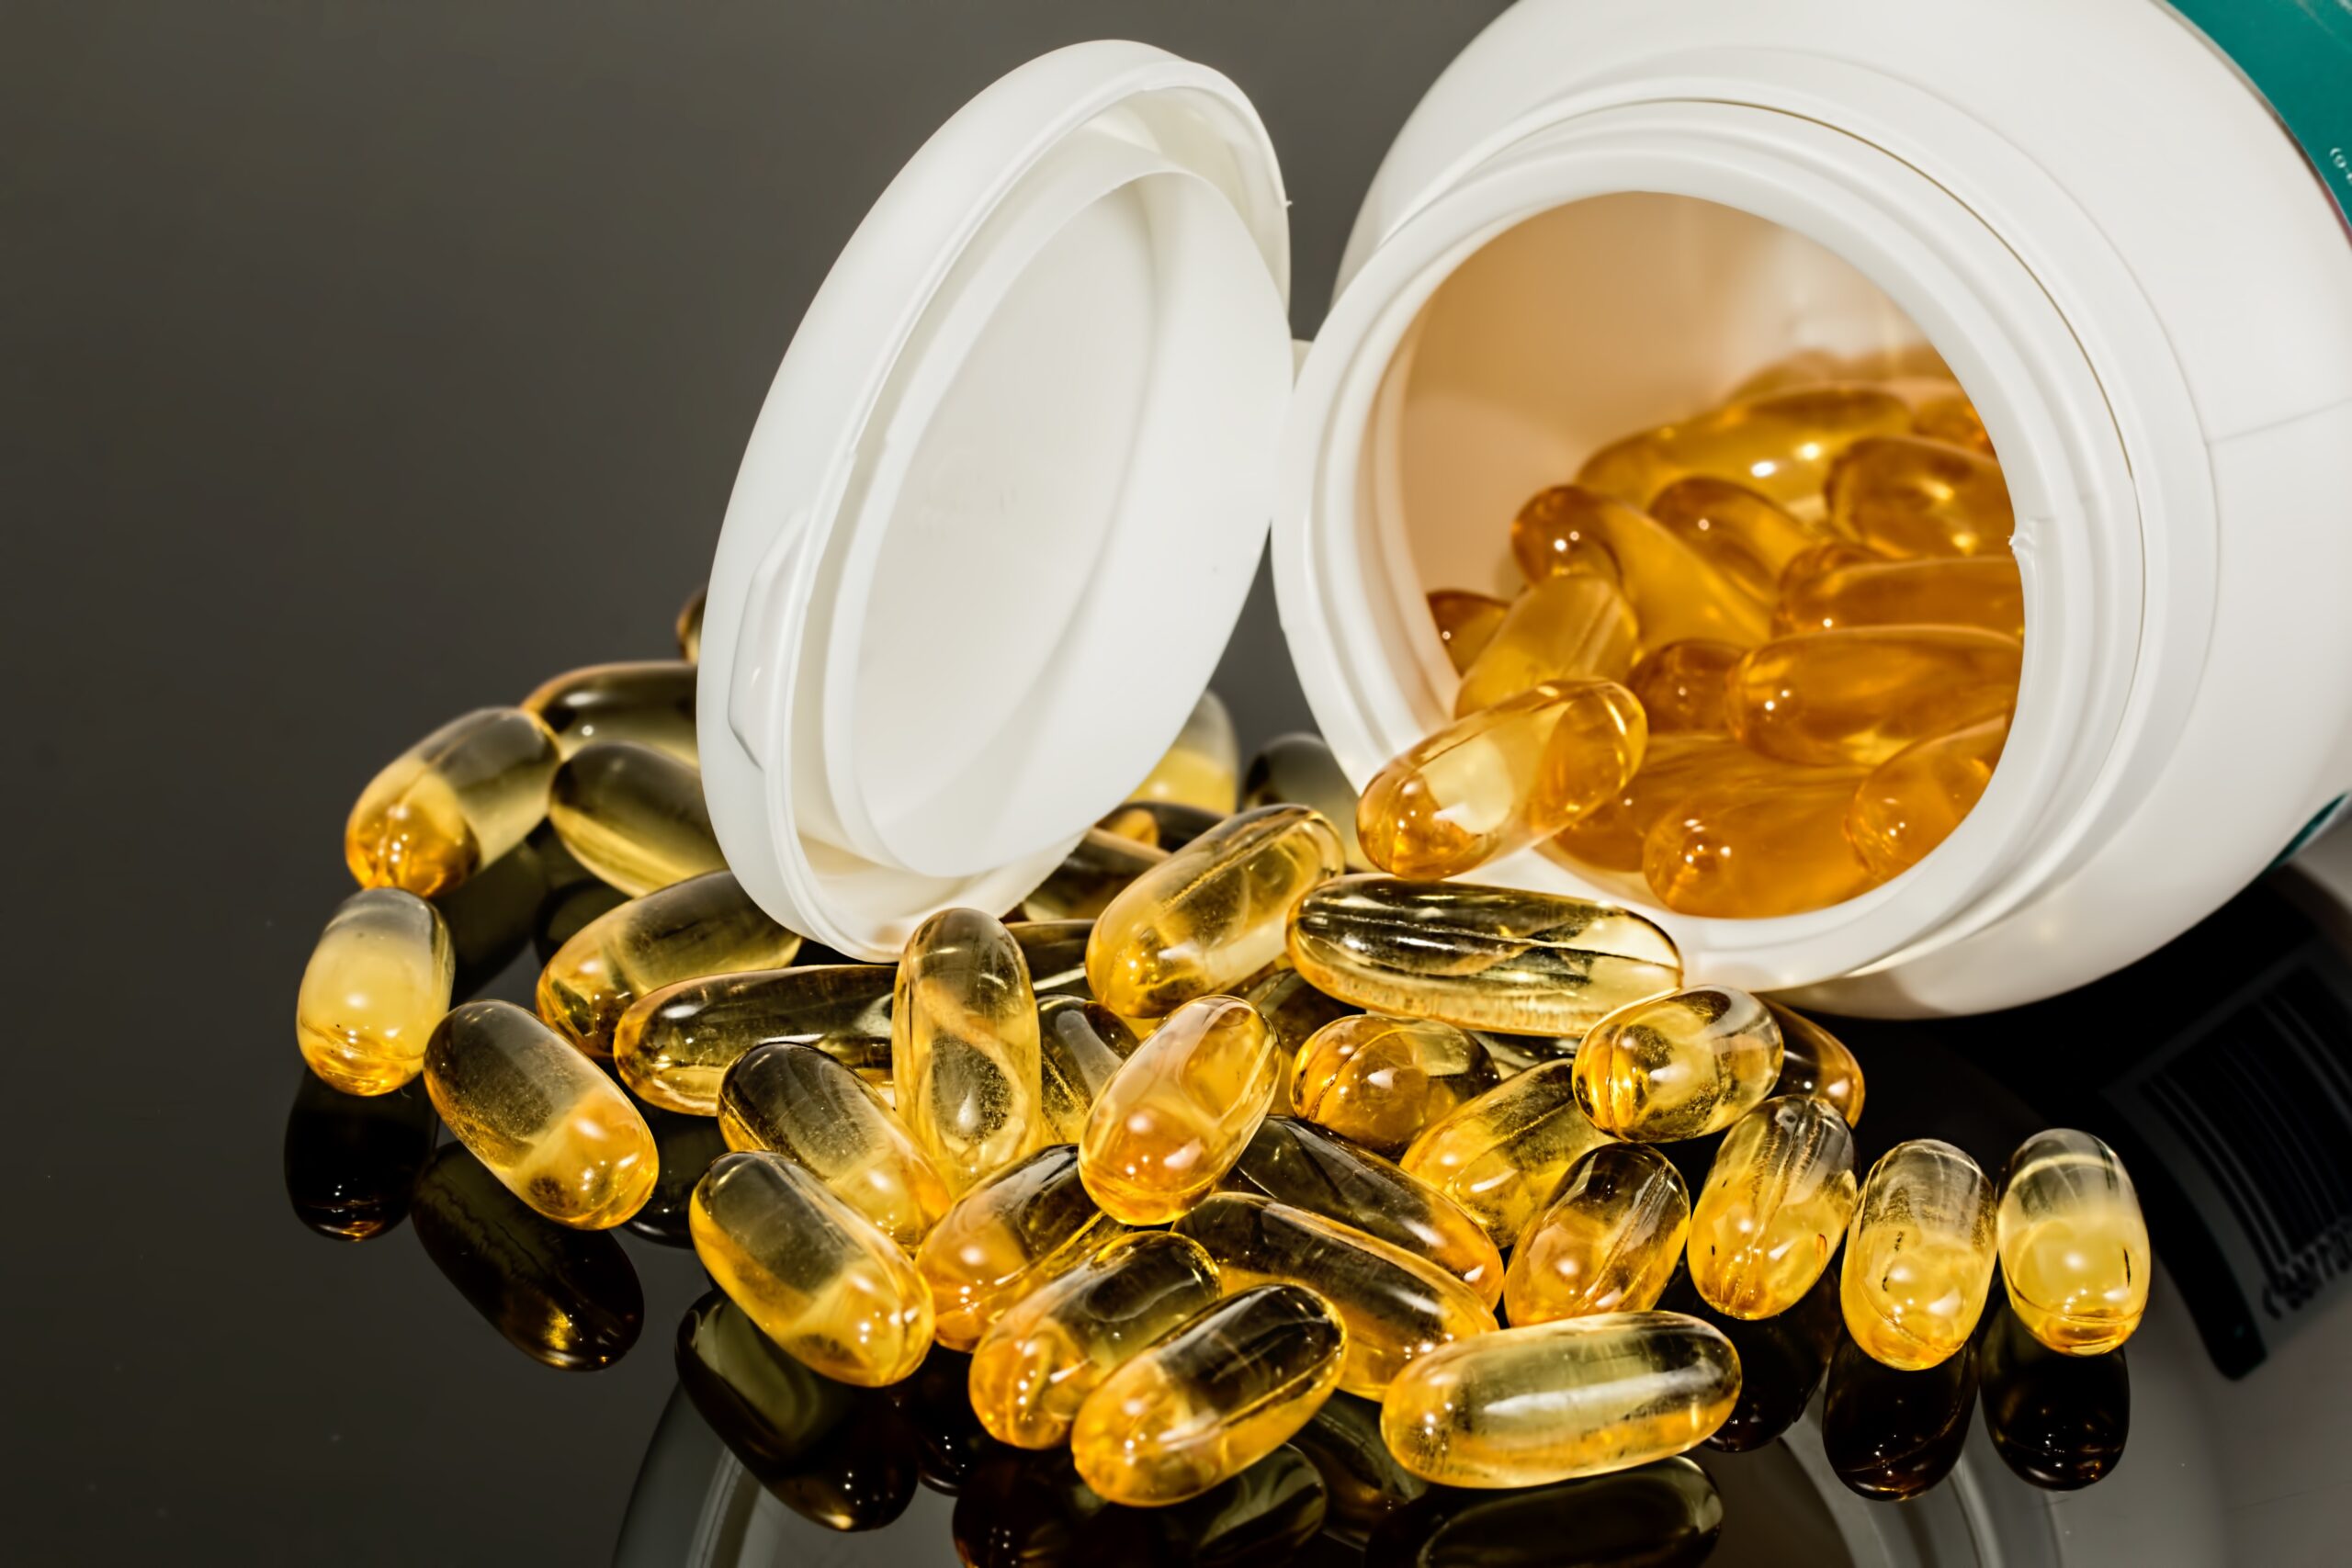 If you're taking vitamin D, you're probably taking too much